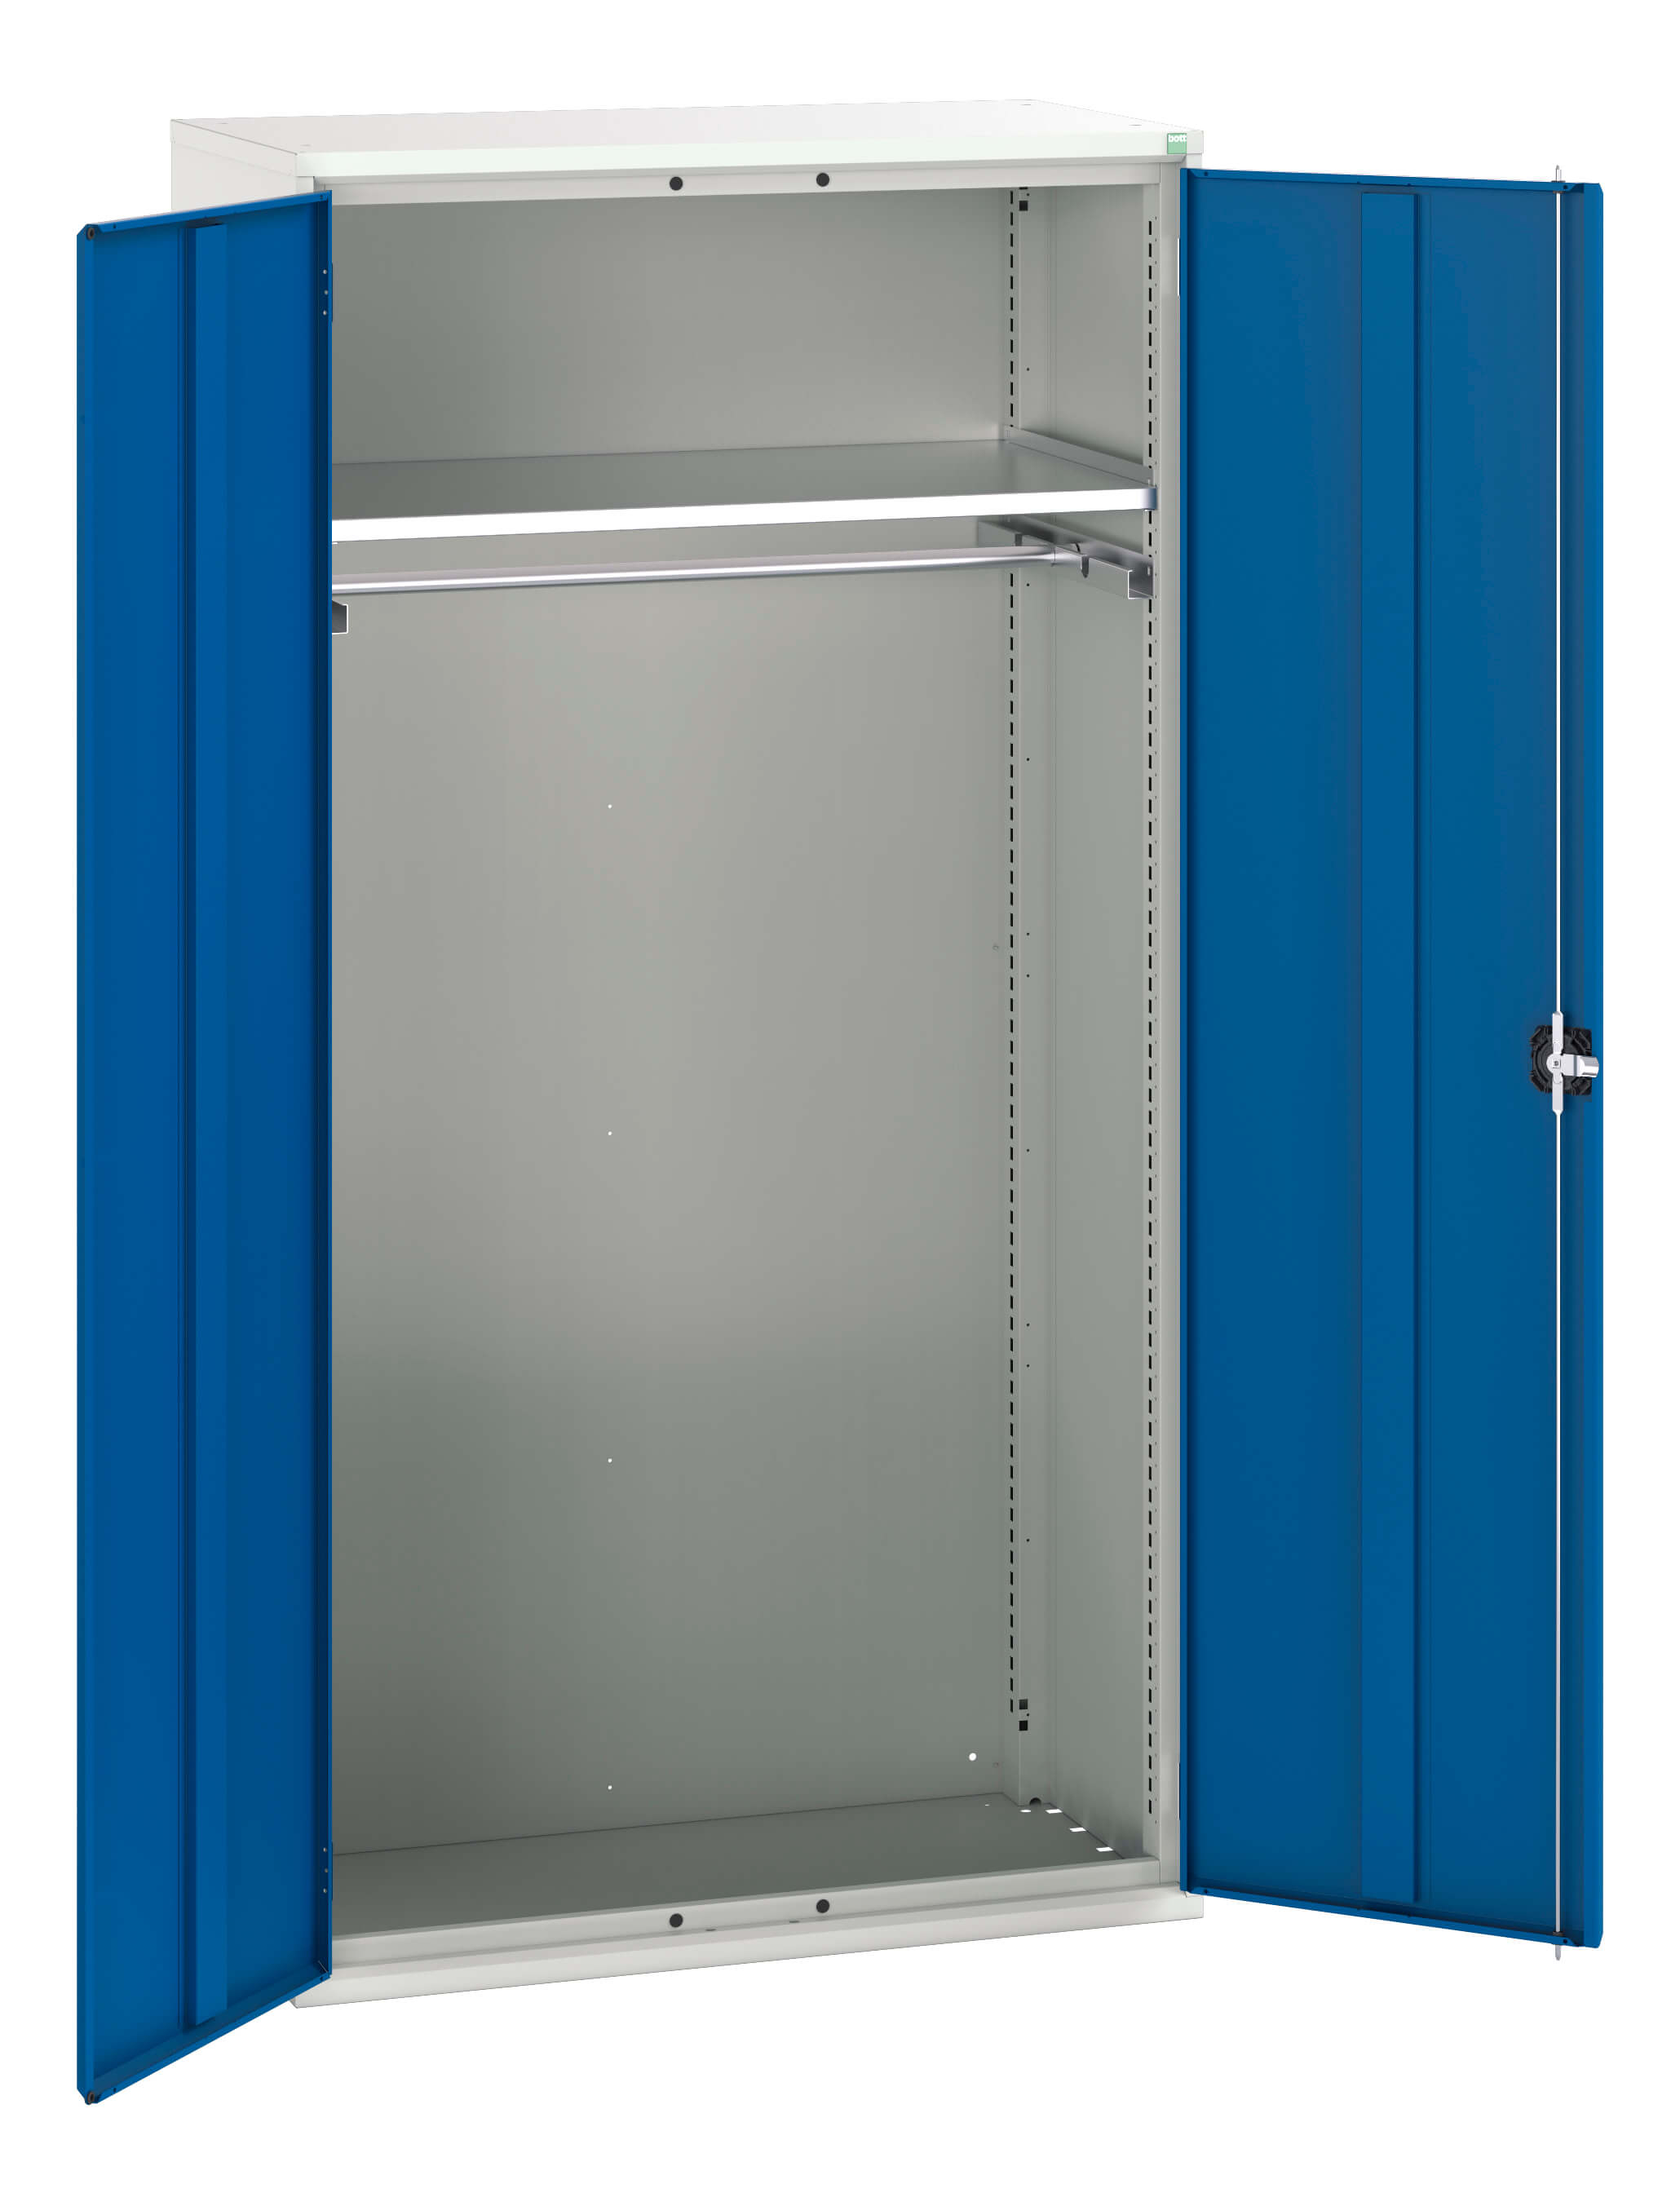 Bott Verso Ppe / Janitorial Kitted Cupboard - 16926584.11